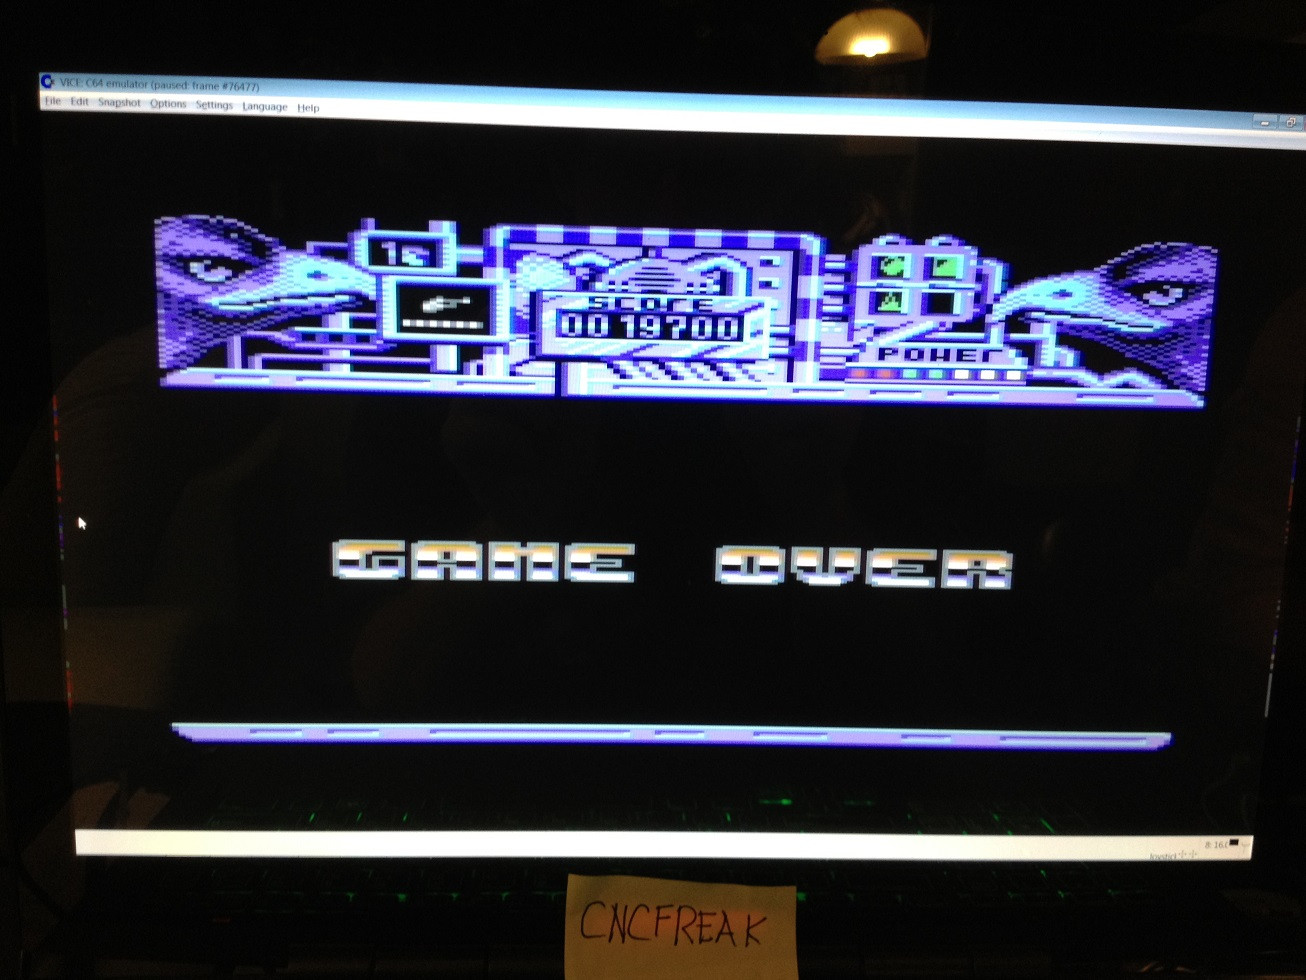 cncfreak: Hawkeye (Commodore 64 Emulated) 19,700 points on 2013-10-13 21:12:53